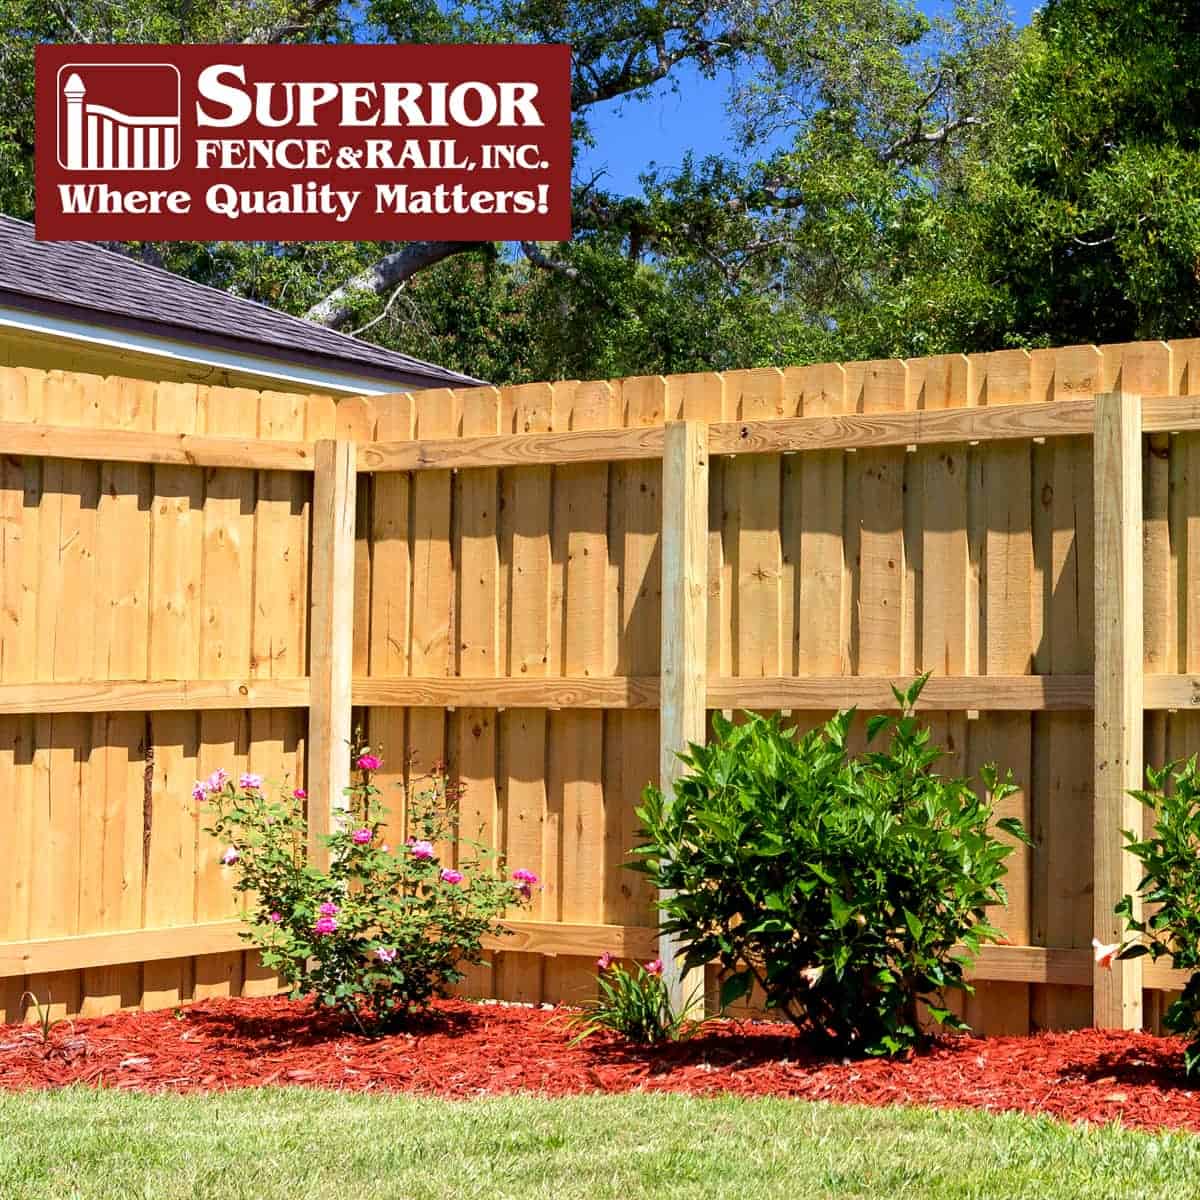 https://www.superiorfenceandrail.com/wp-content/uploads/2024/03/Chino-Hills-fence-company-contractor.jpg